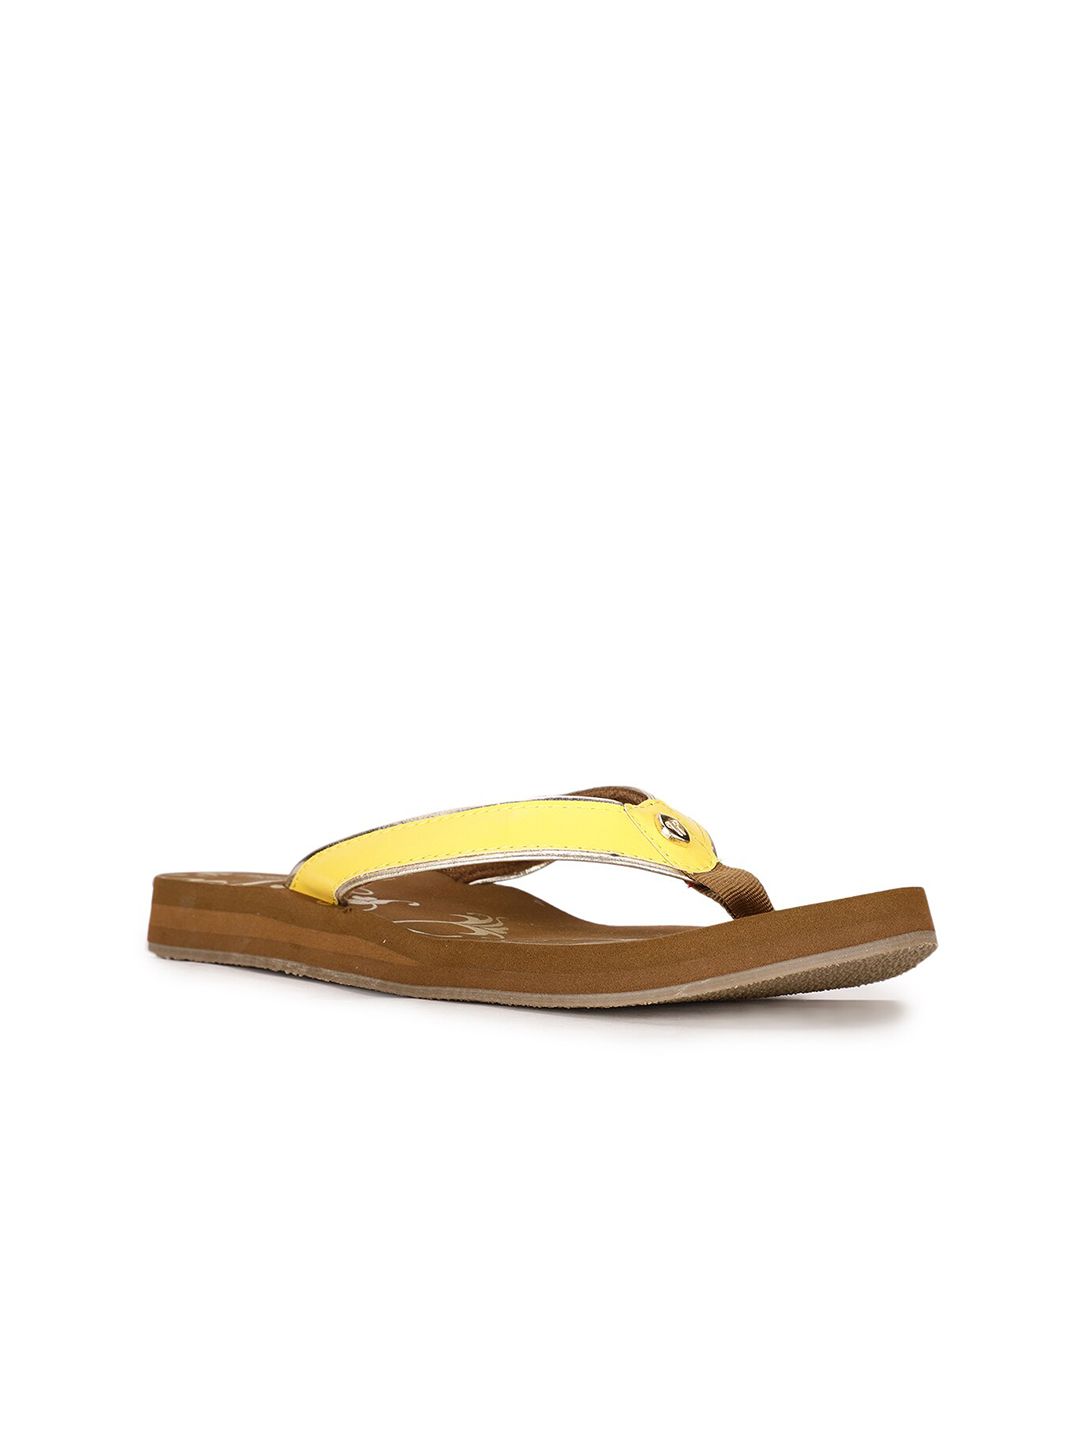 Bata Women Yellow & Brown Printed Room Slippers Price in India